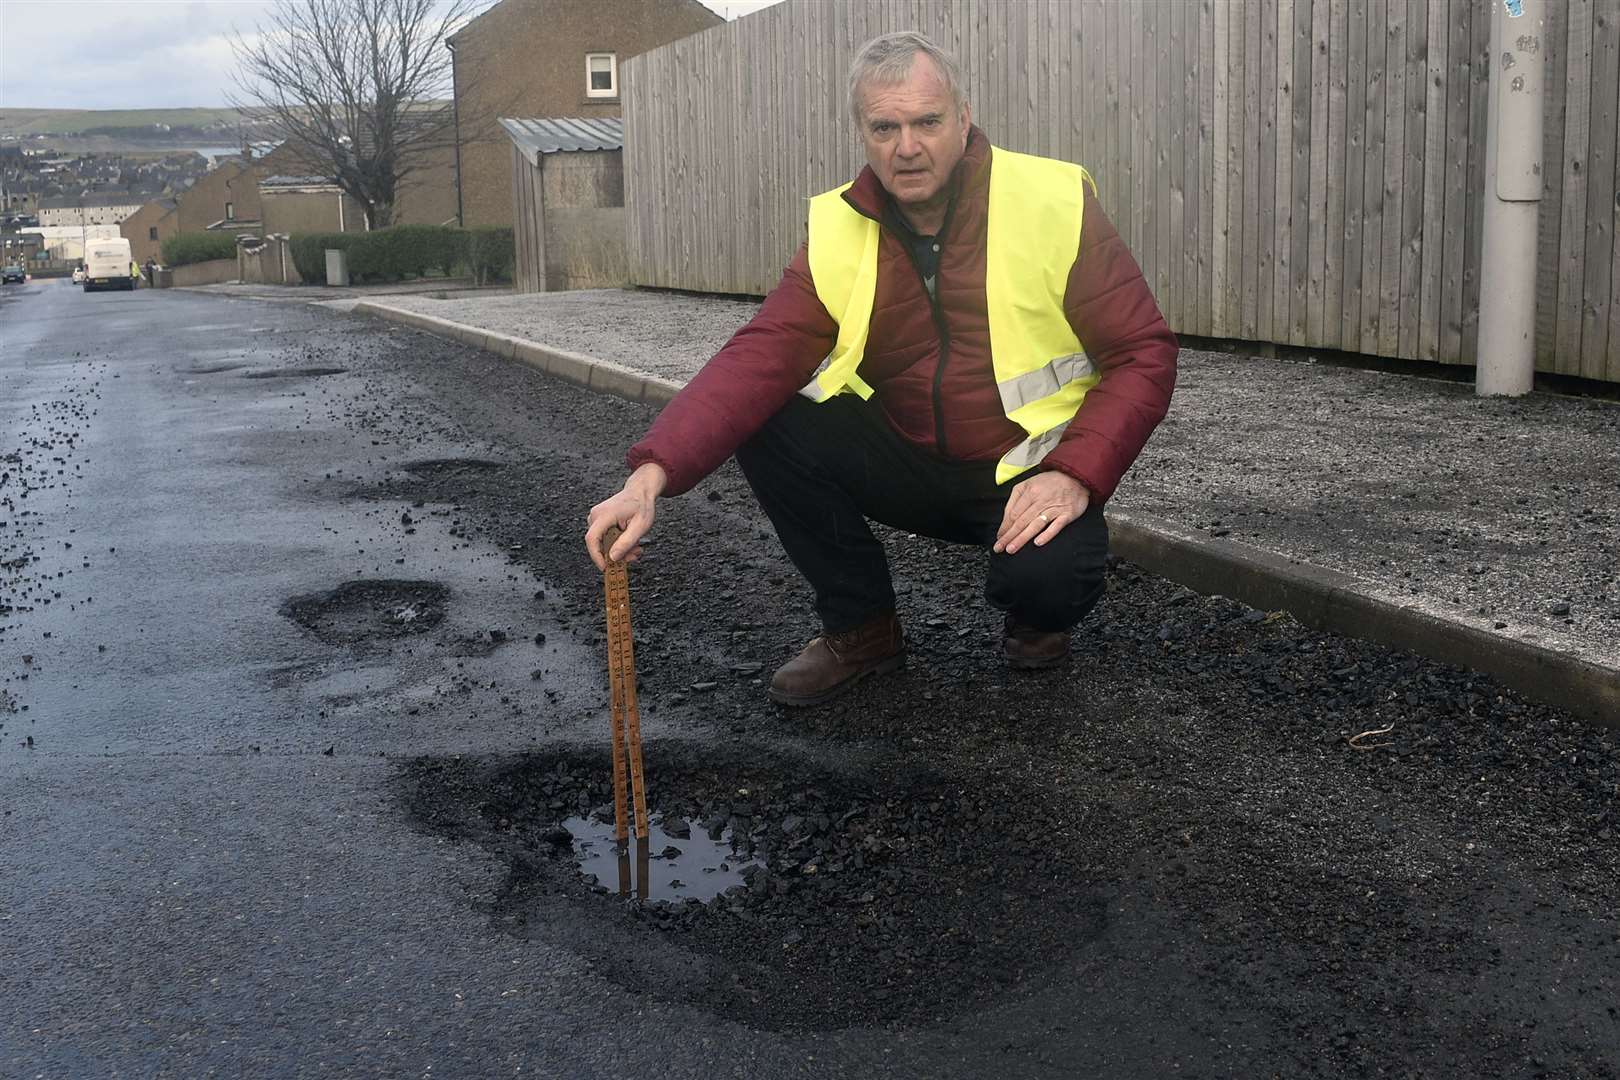 Ron Gunn wants some of the £44million surplus spent on improving roads. Picture: Mel Brooks